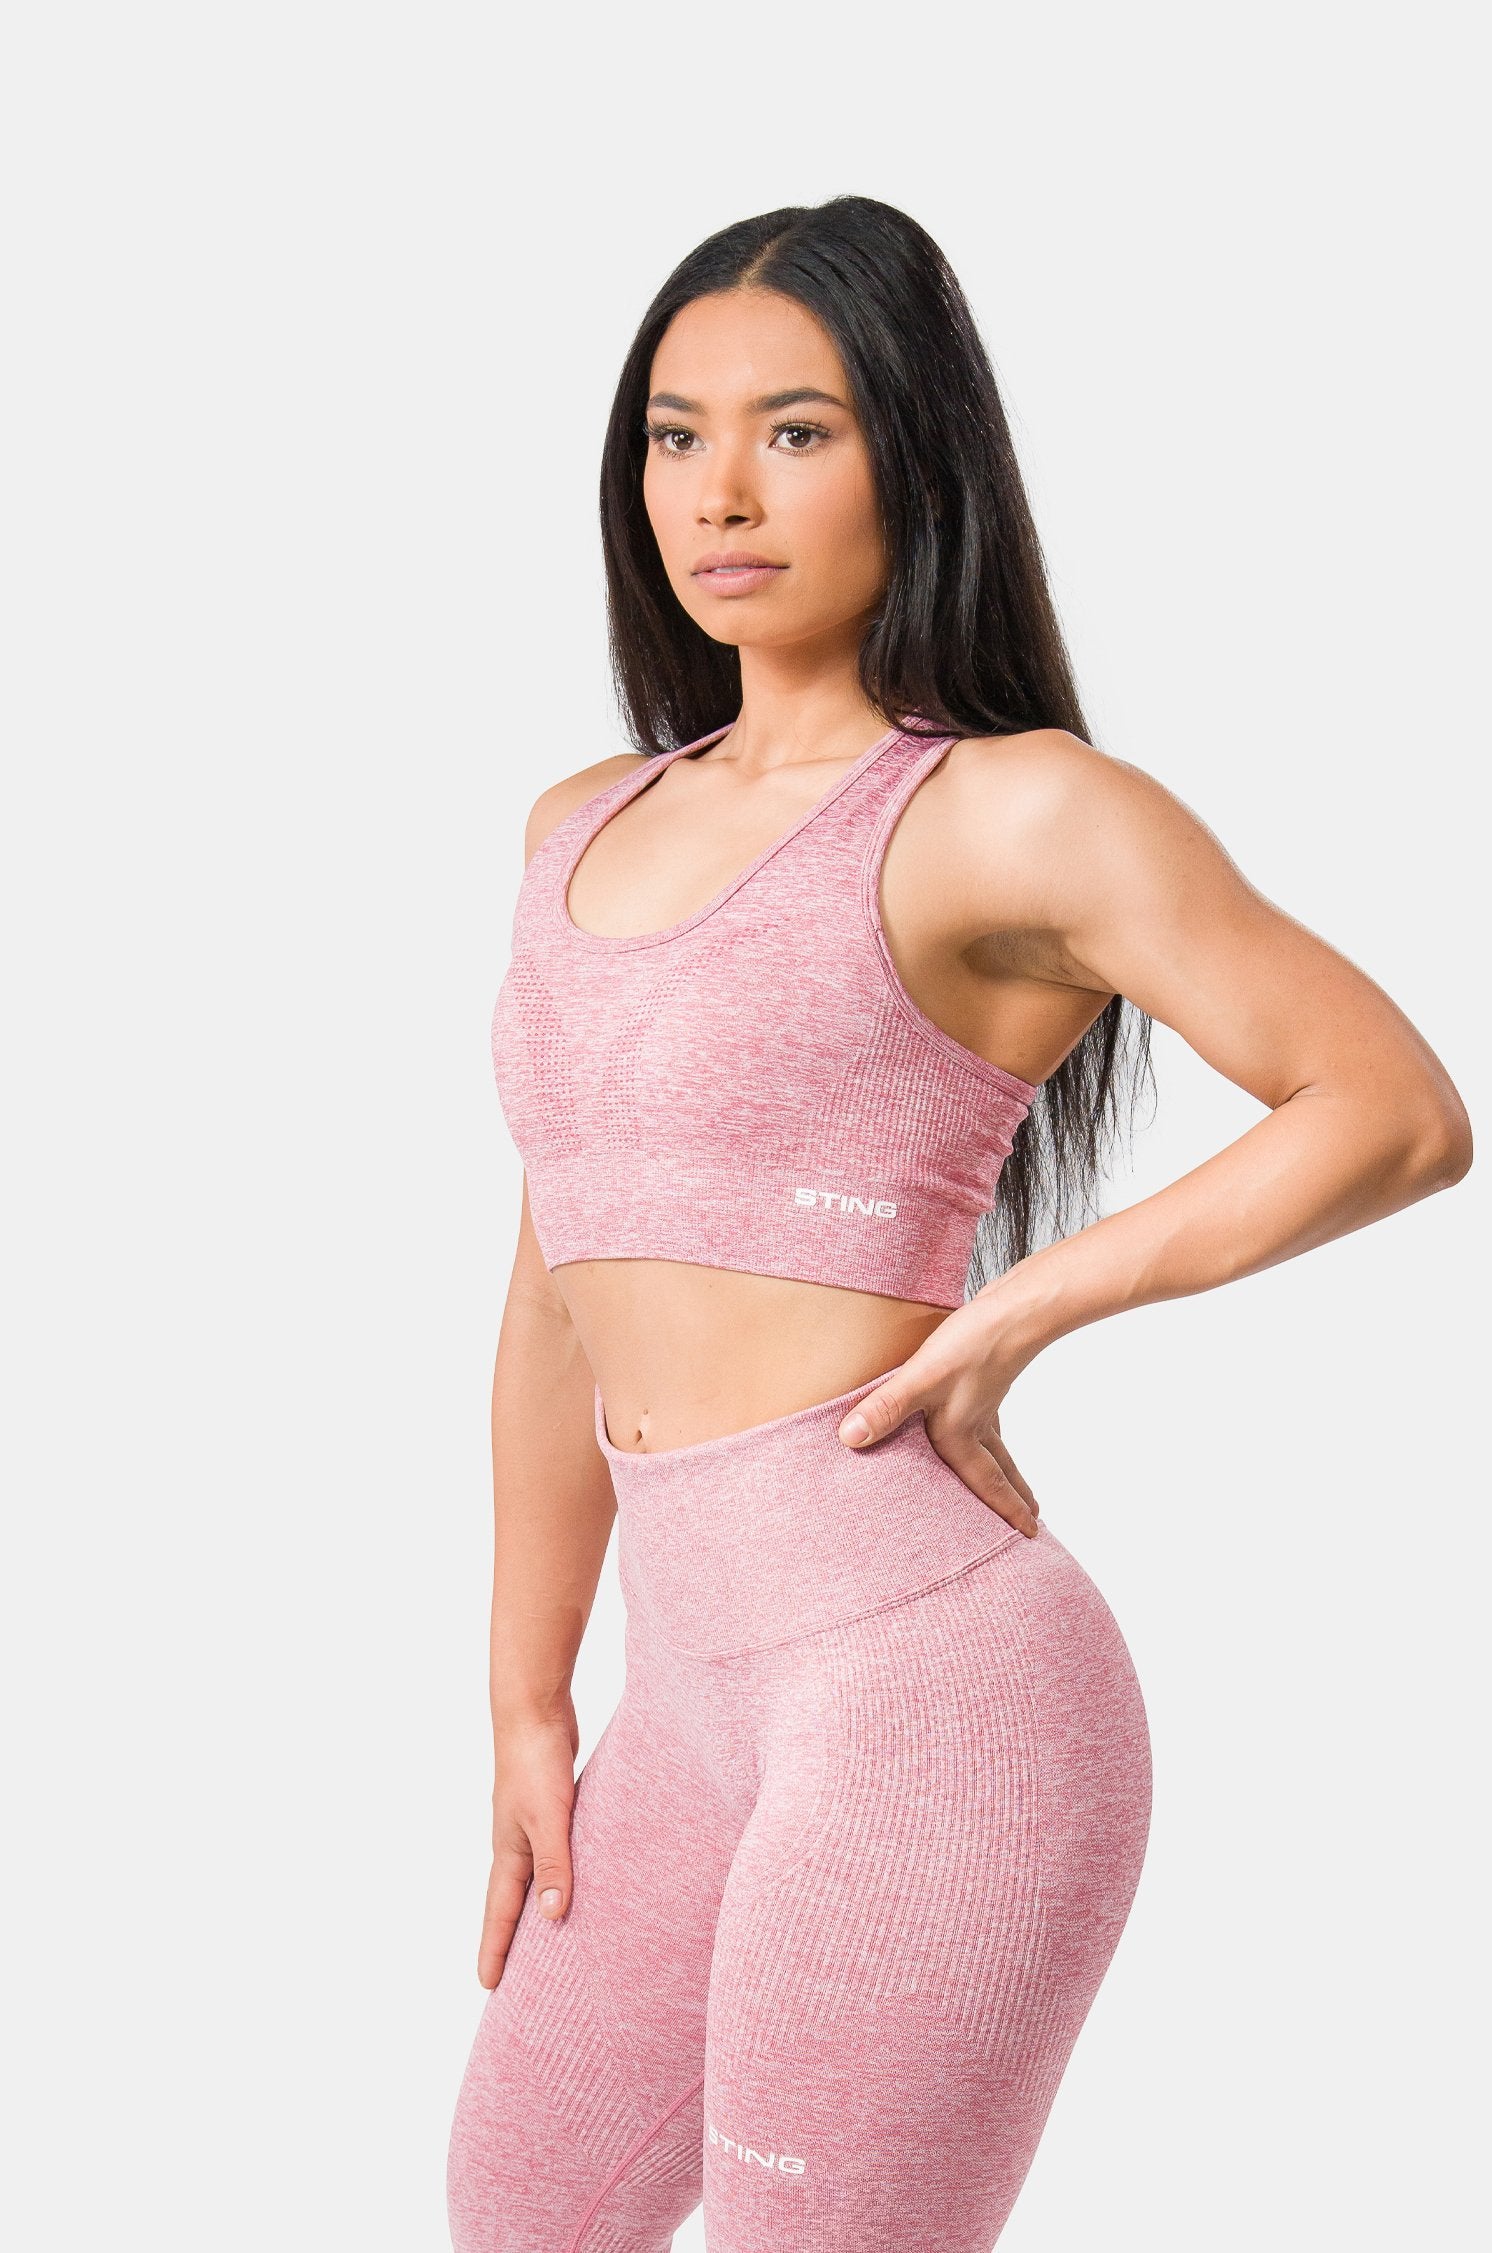 Women's Activewear & Workout Clothes for Women